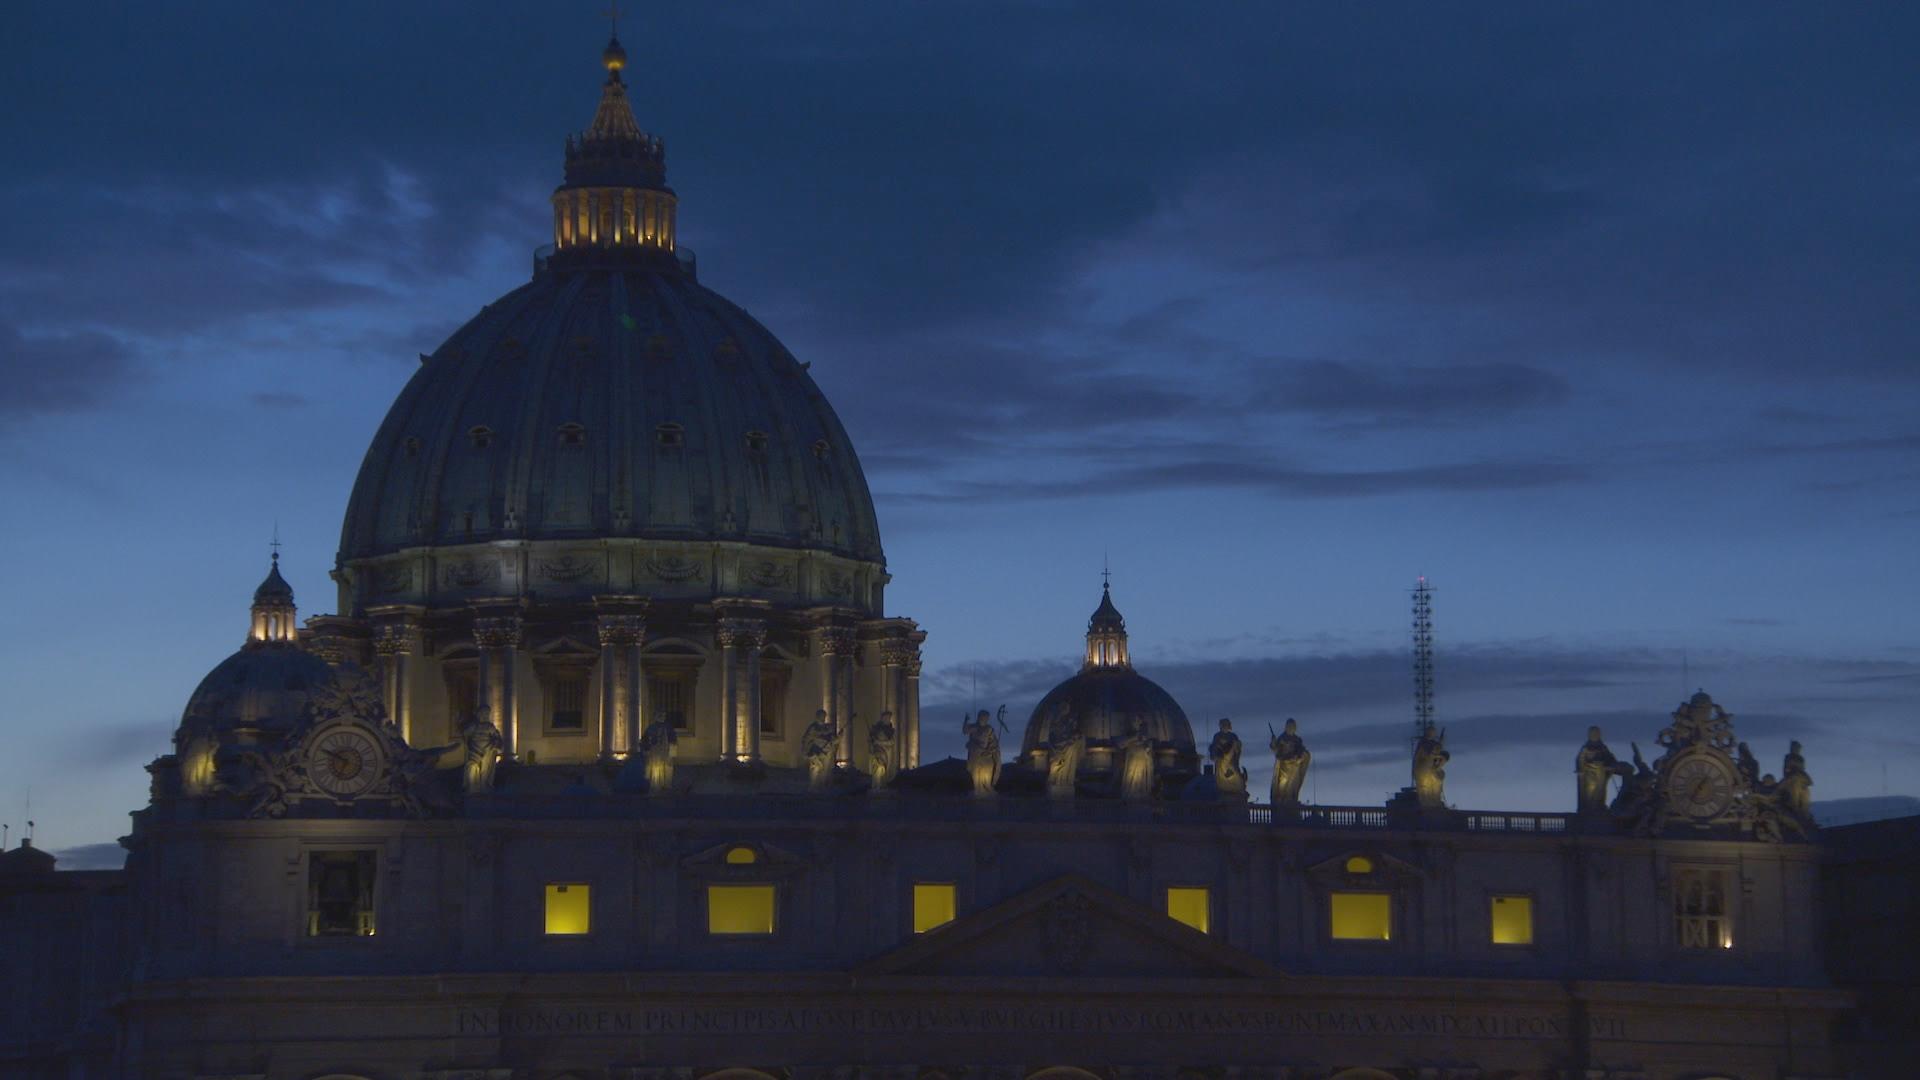 In a new Frontline documentary, director Antony Thomas goes inside the Vatican to reveal secrets of the institution. 